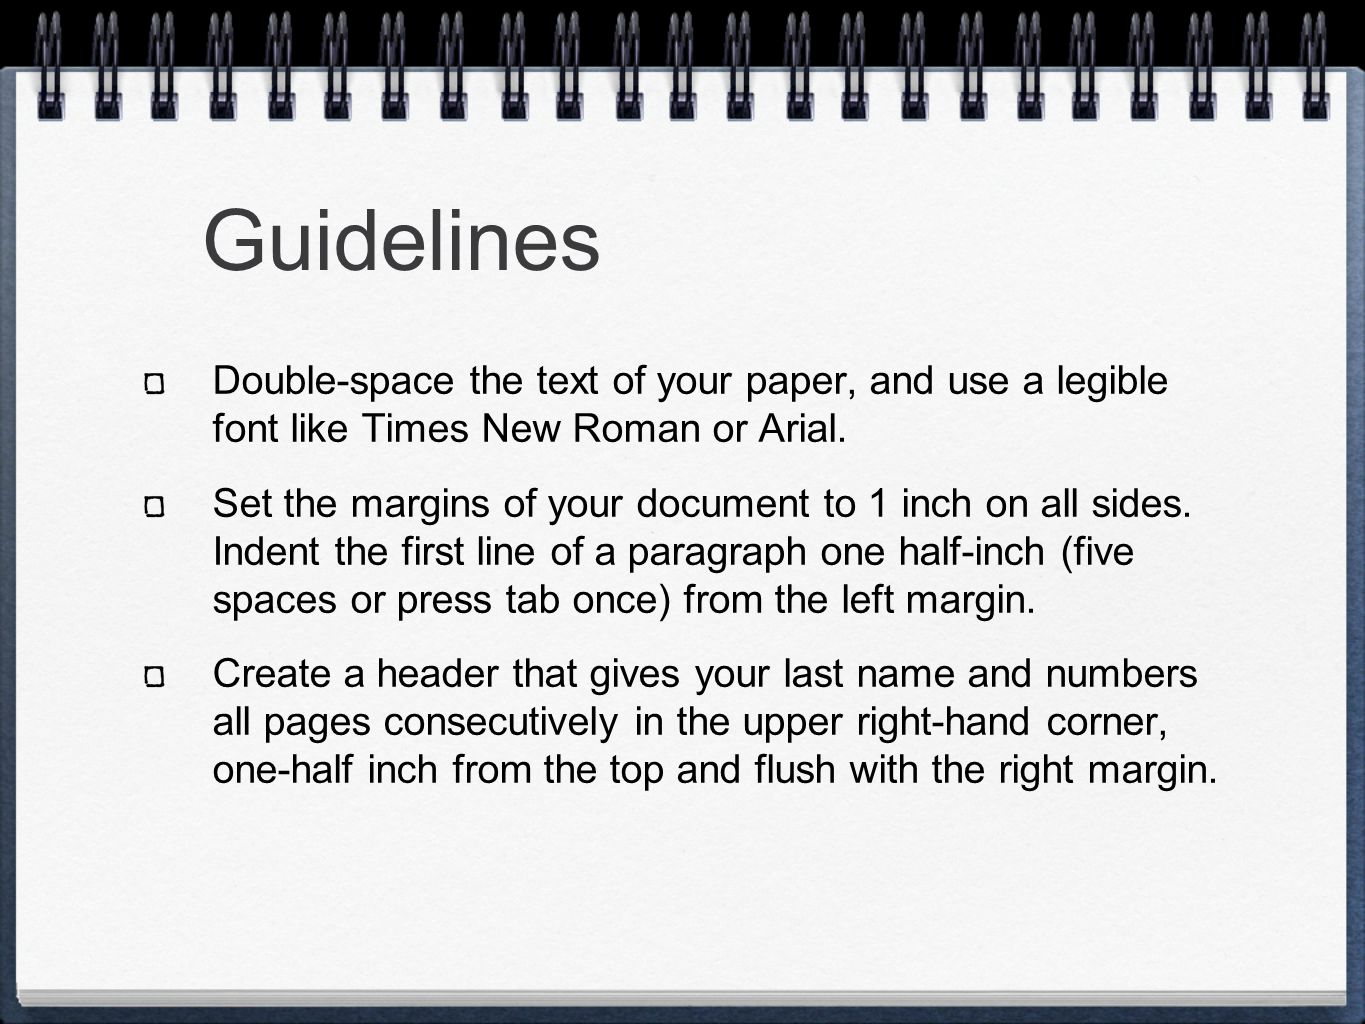 Guidelines Double-space the text of your paper, and use a legible font like Times New Roman or Arial.